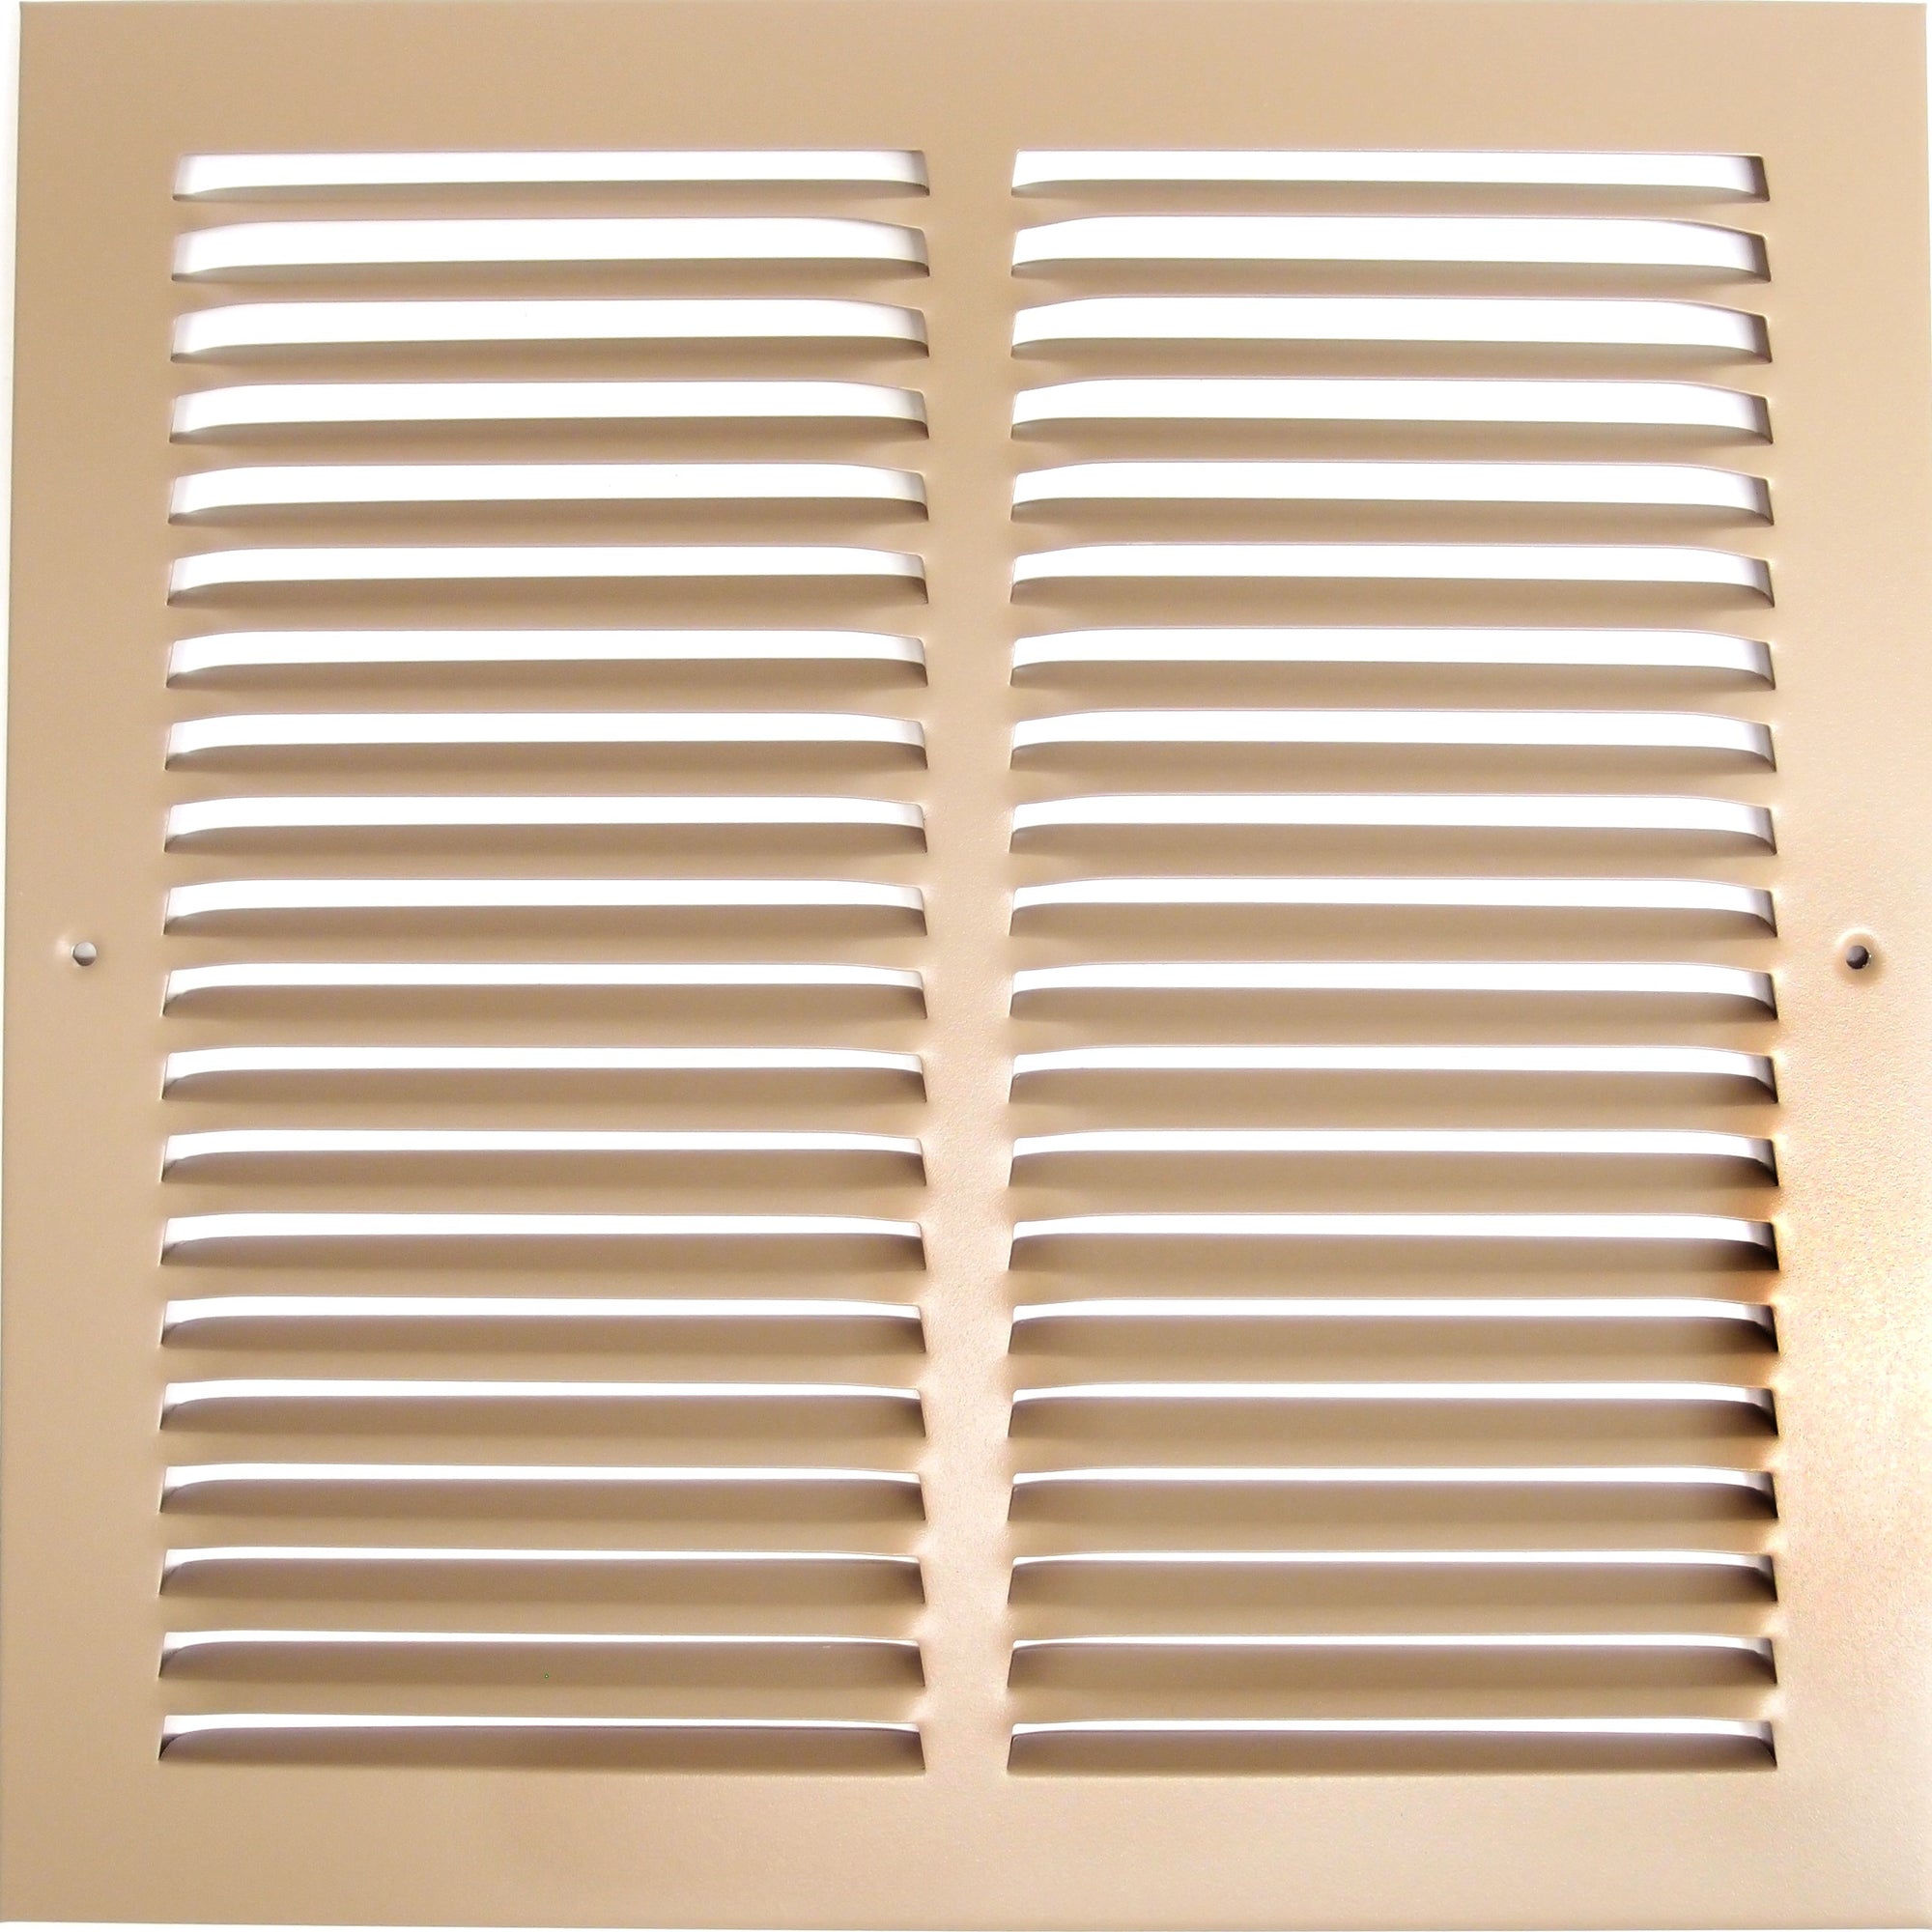 12" X 8" Air Vent Return Grilles - Sidewall and Ceiling - Steel